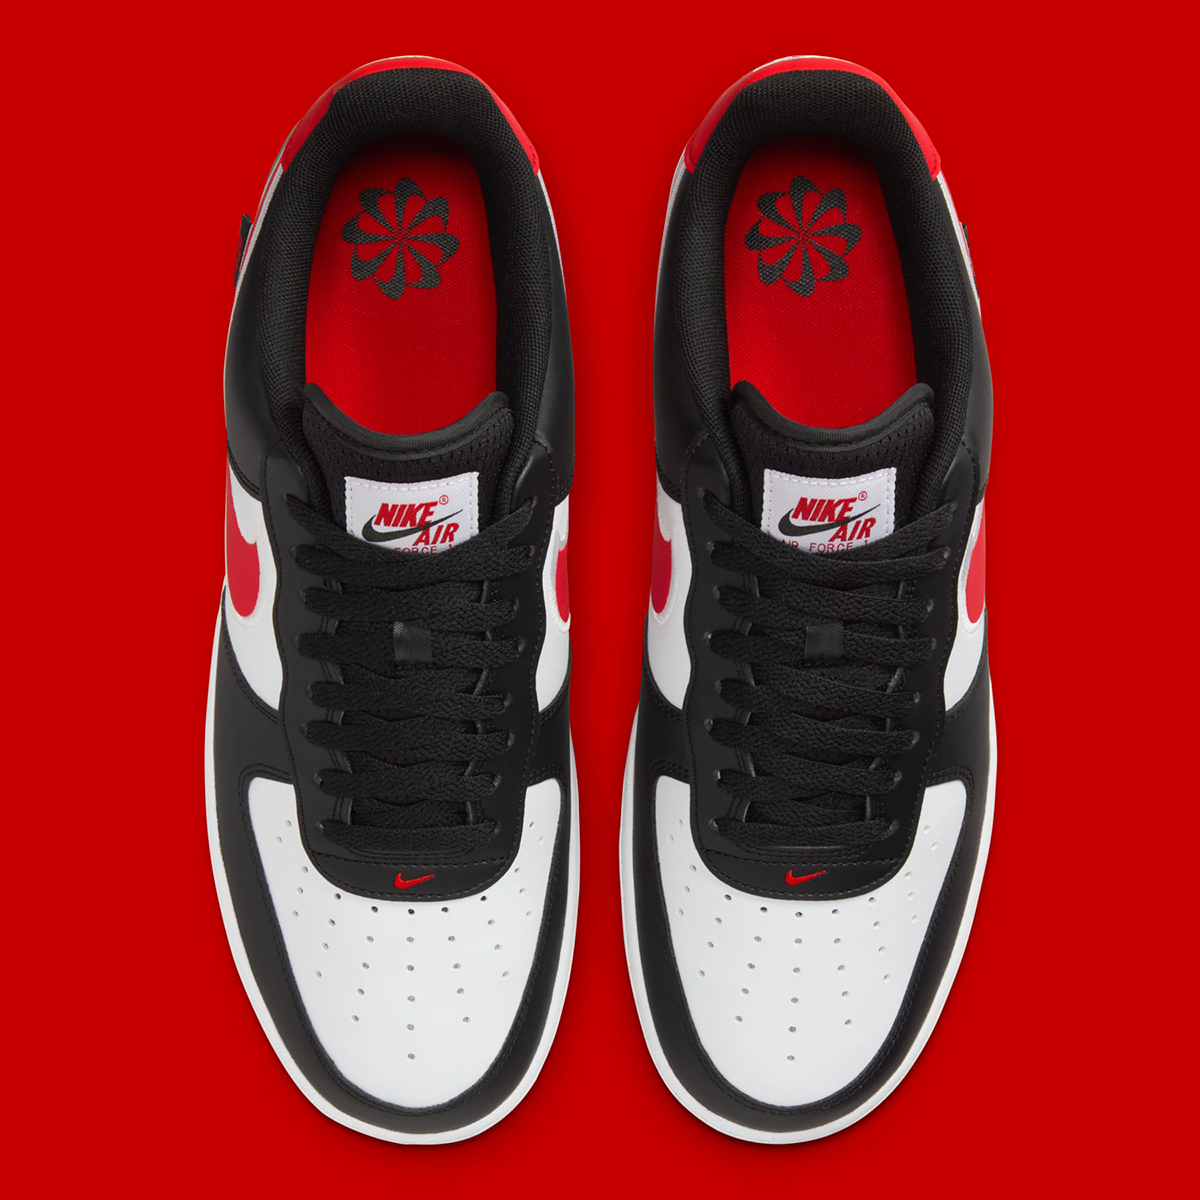 Nike Air Force 1 Low Black University Red White Hm0721 002 1